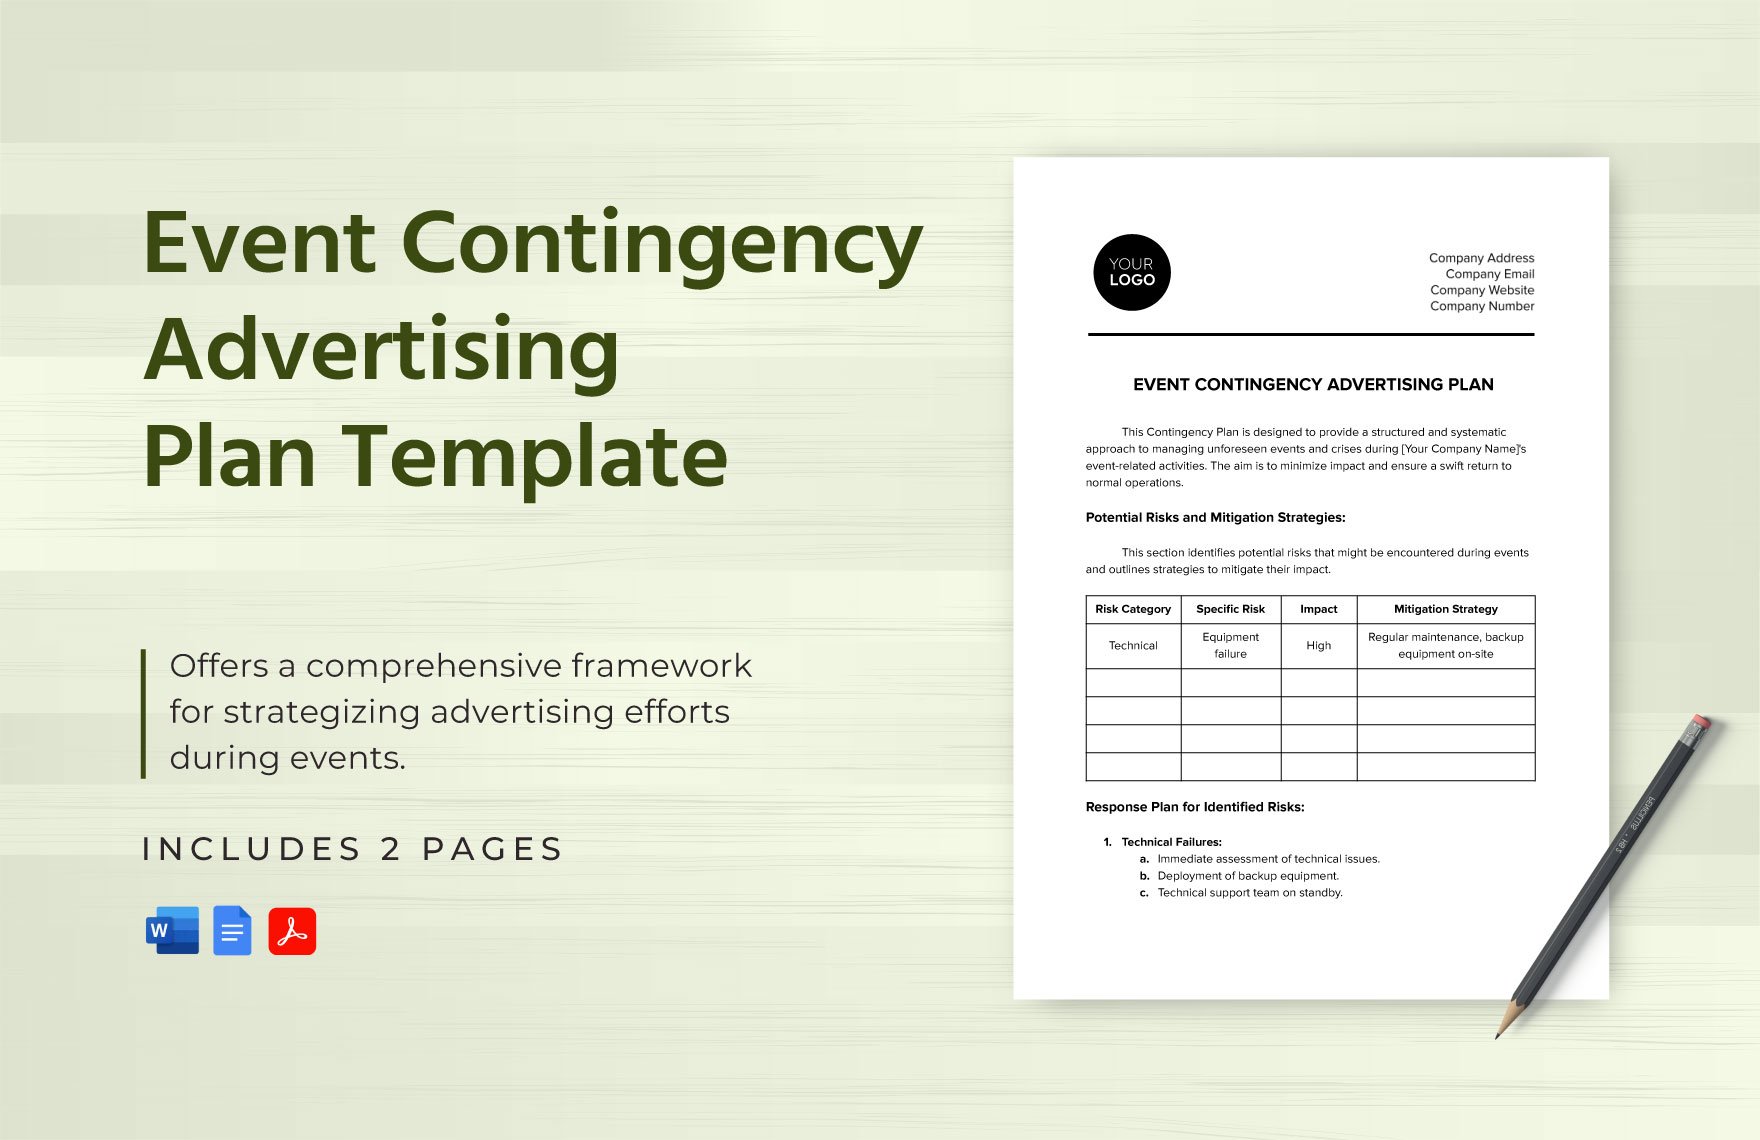 Event Contingency Advertising Plan Template